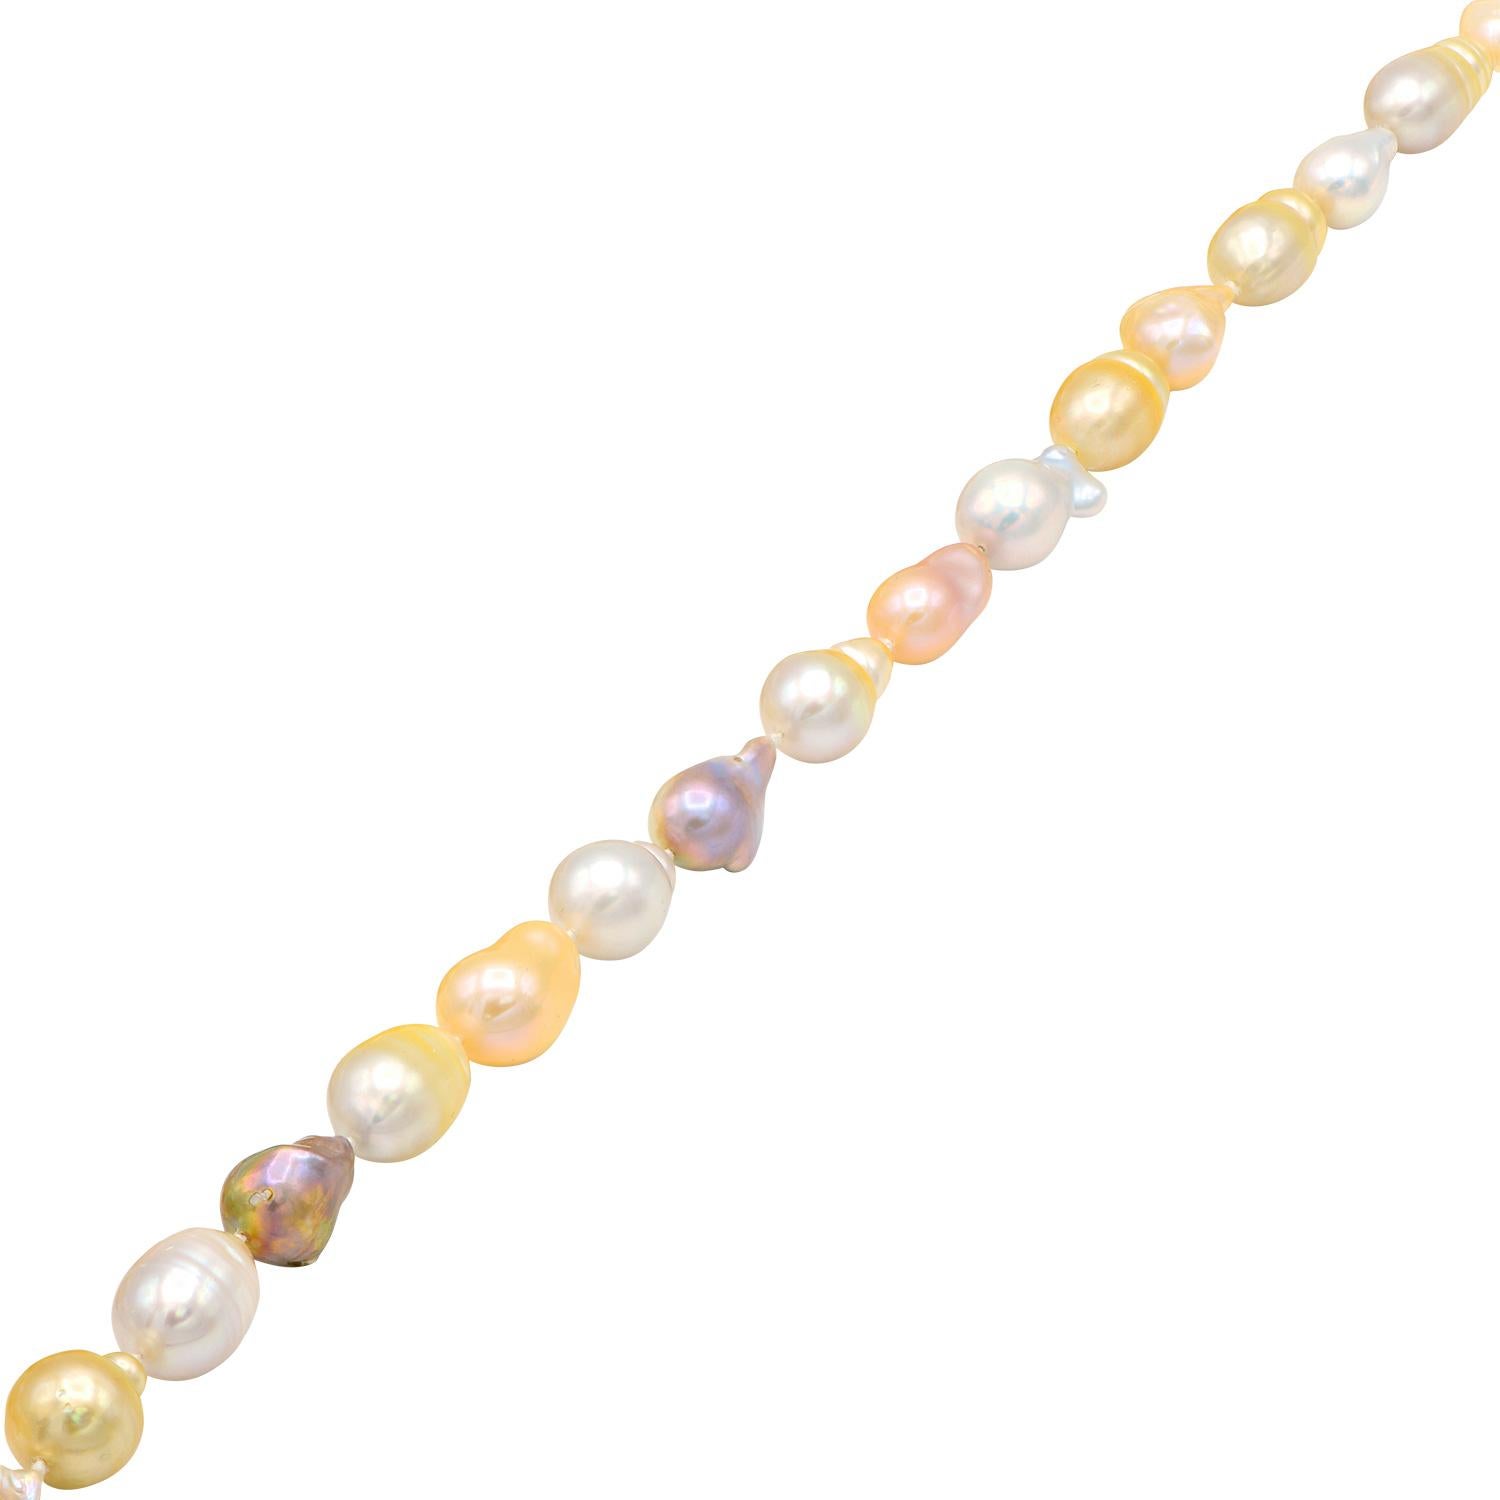 This beautiful pearl necklace is made from pink freshwater baroque pearls with white and gold south sea baroque pearls. The 45 pearls make a beautiful 36 inch strand that is strung with a double knot in between each pearl and closed with a 14 karat